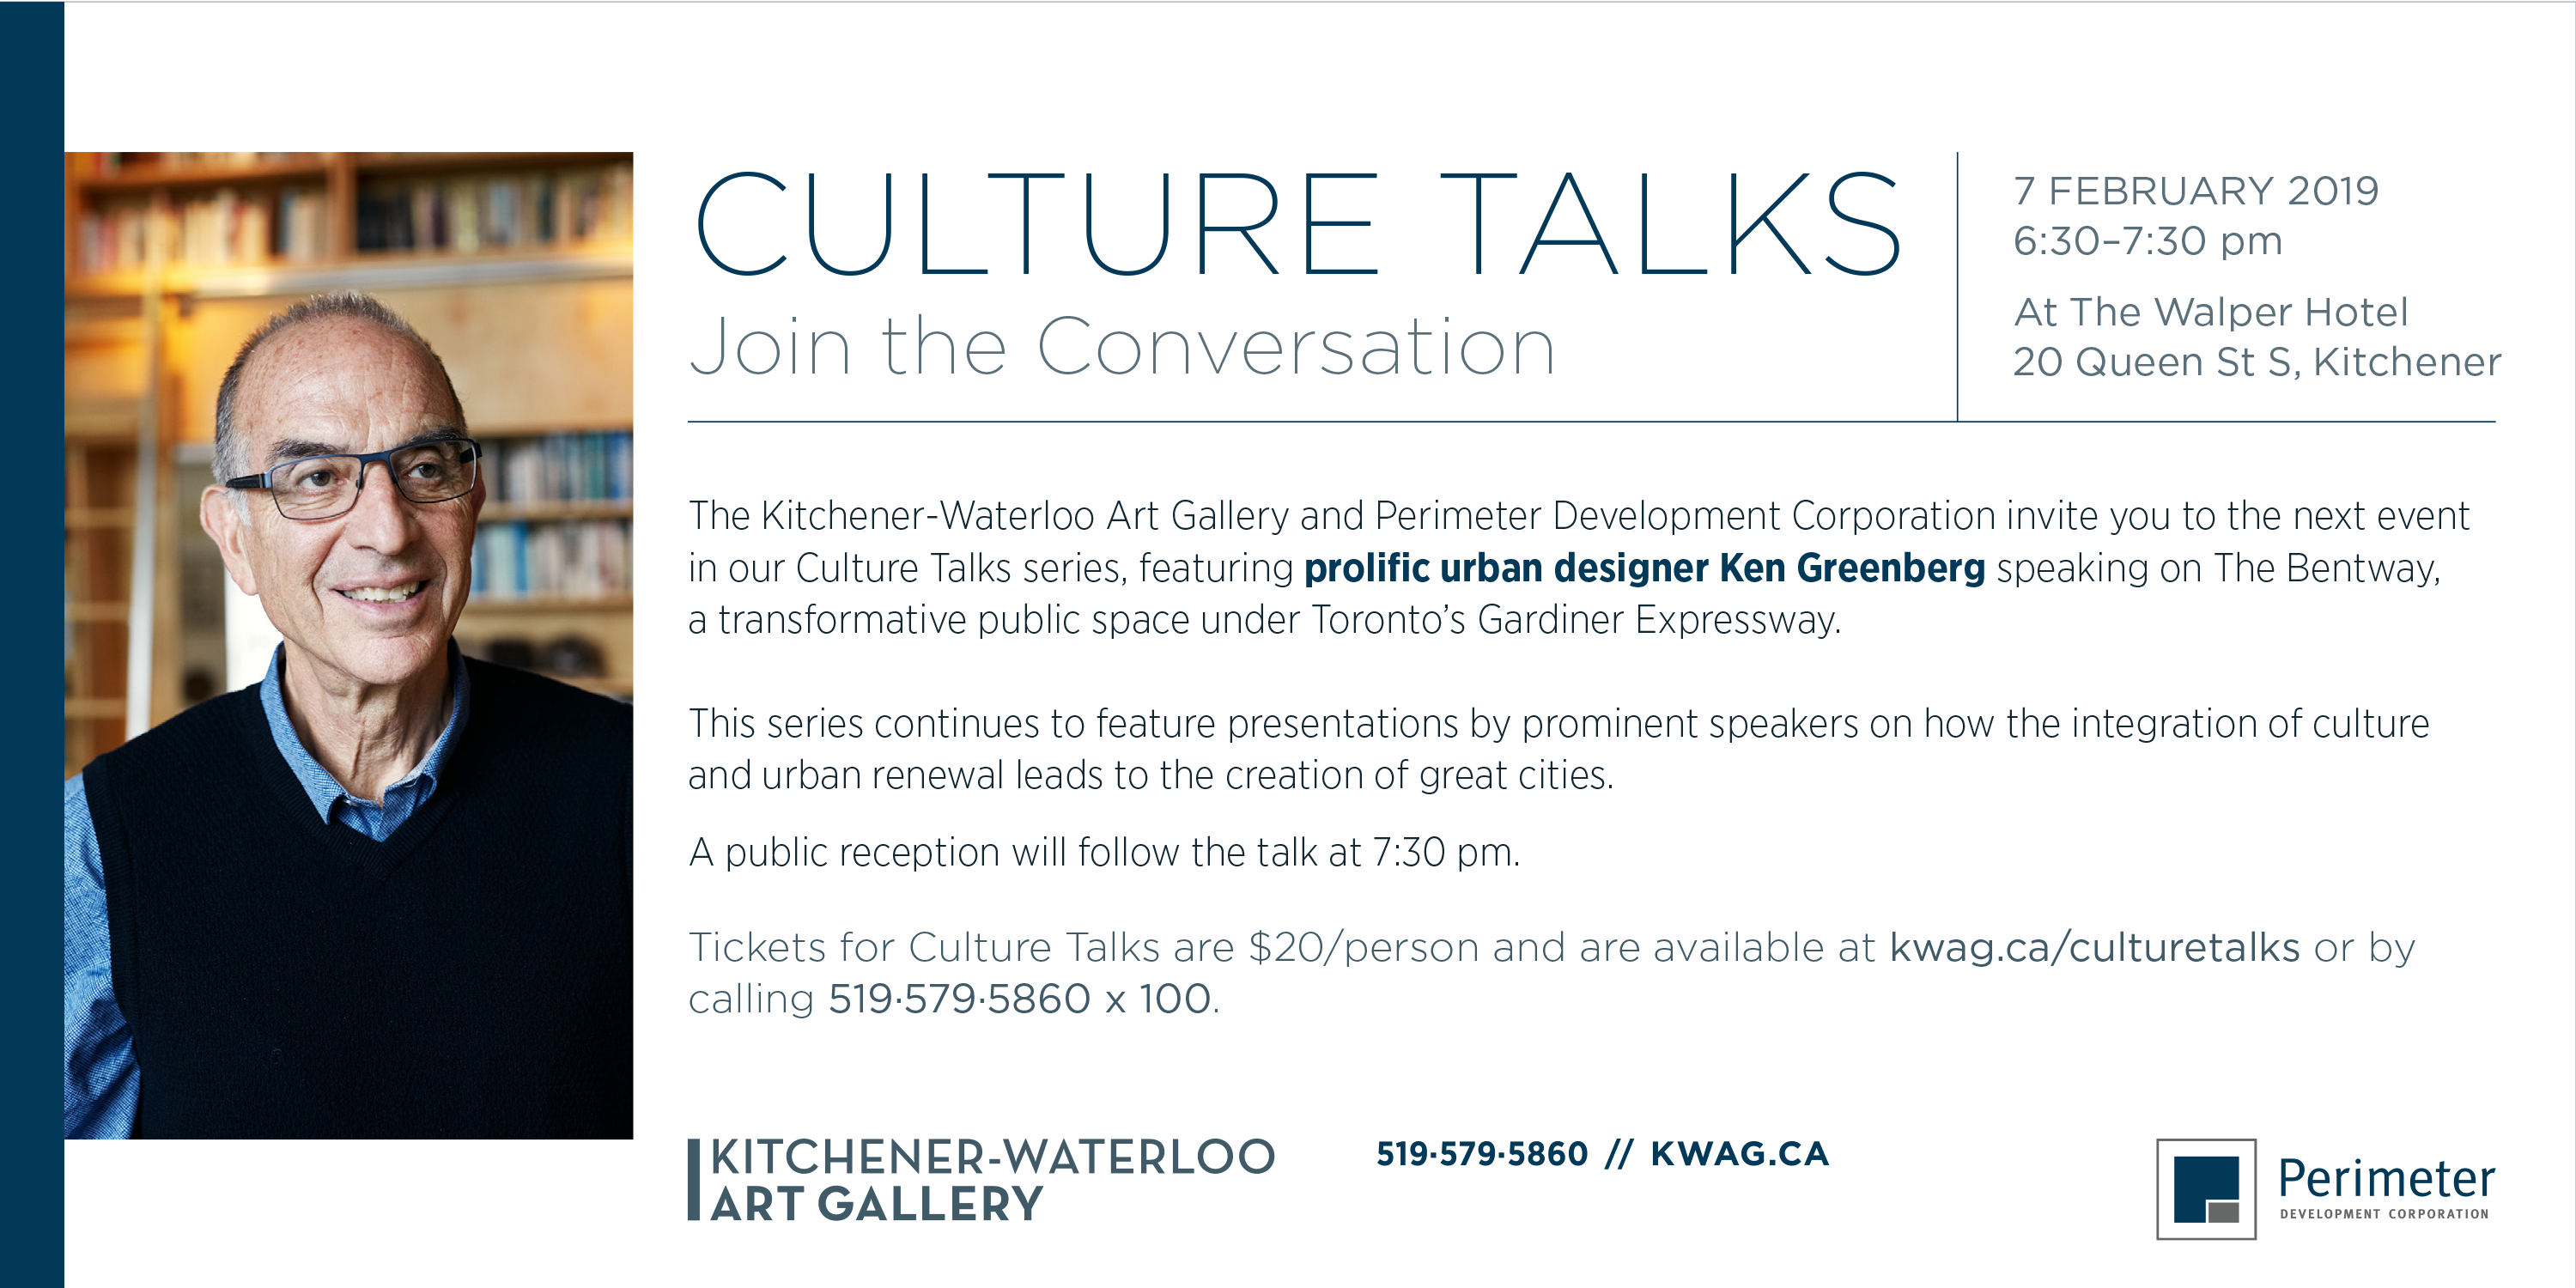 CULTURE TALKS Join the Conversation